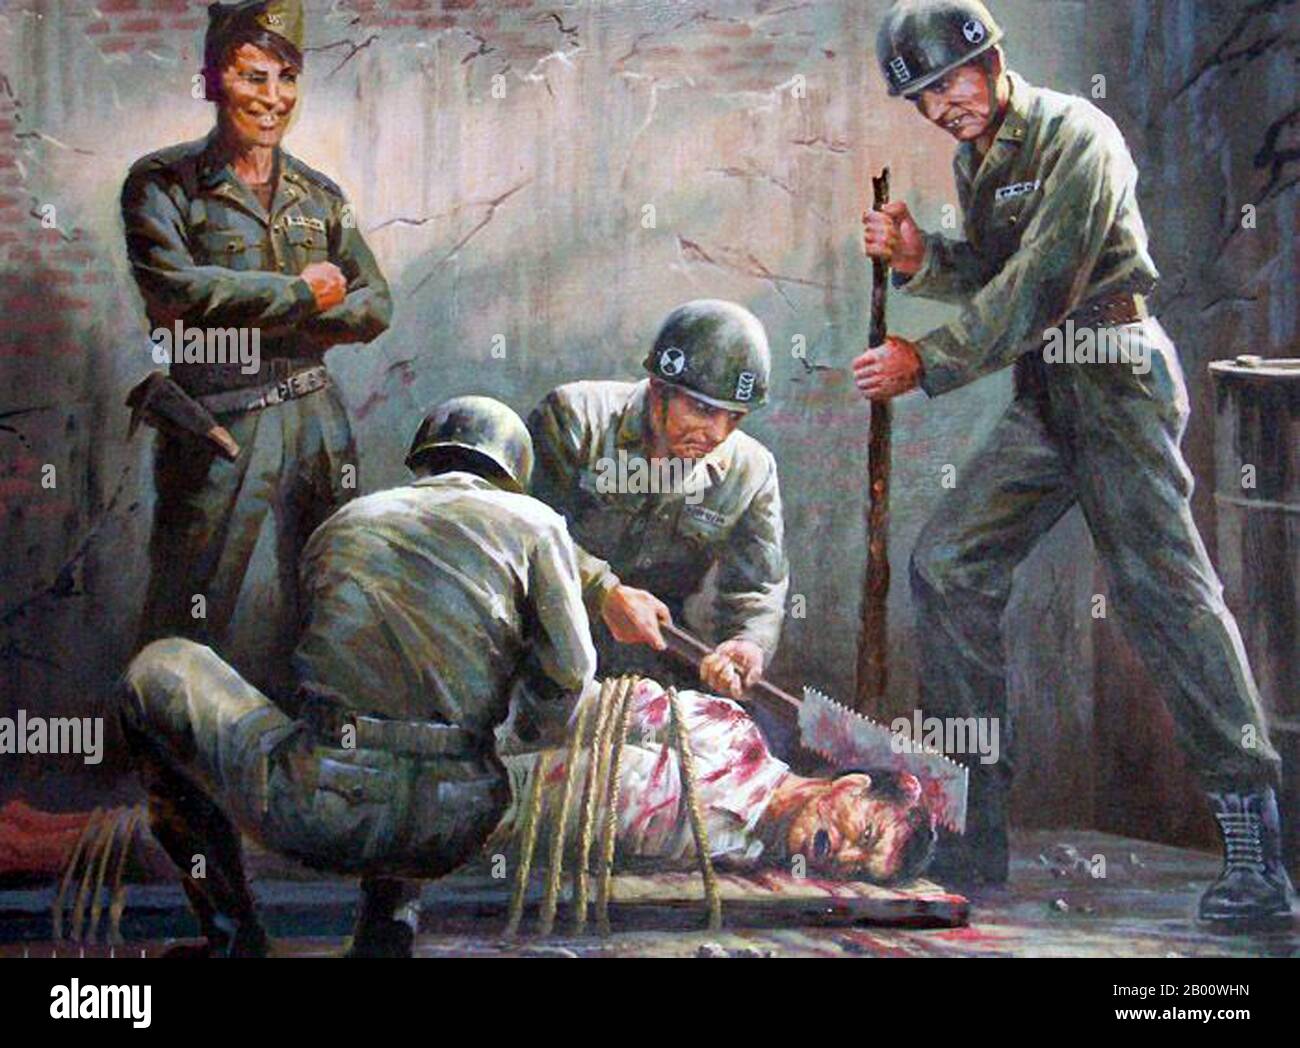 Korea: A depiction of putative US war crimes during the Korean War (1950-1953) on display at the Sinchon-Ri Museum, North Korea (DPRK).  At the beginning of the Korean War in 1950 the town of Sinchon in North Korea was allegedly the site of a massacre of civilians by occupying U.S forces. North Korean sources claim the number of civilians killed over the 52-day period at over 35000 people; equivalent to one-fourth the county's population at the time. The North Korean government has operated the Sinchon Museum of American War Atrocities in Sinchon Town since 1958, displaying relics and remains. Stock Photo